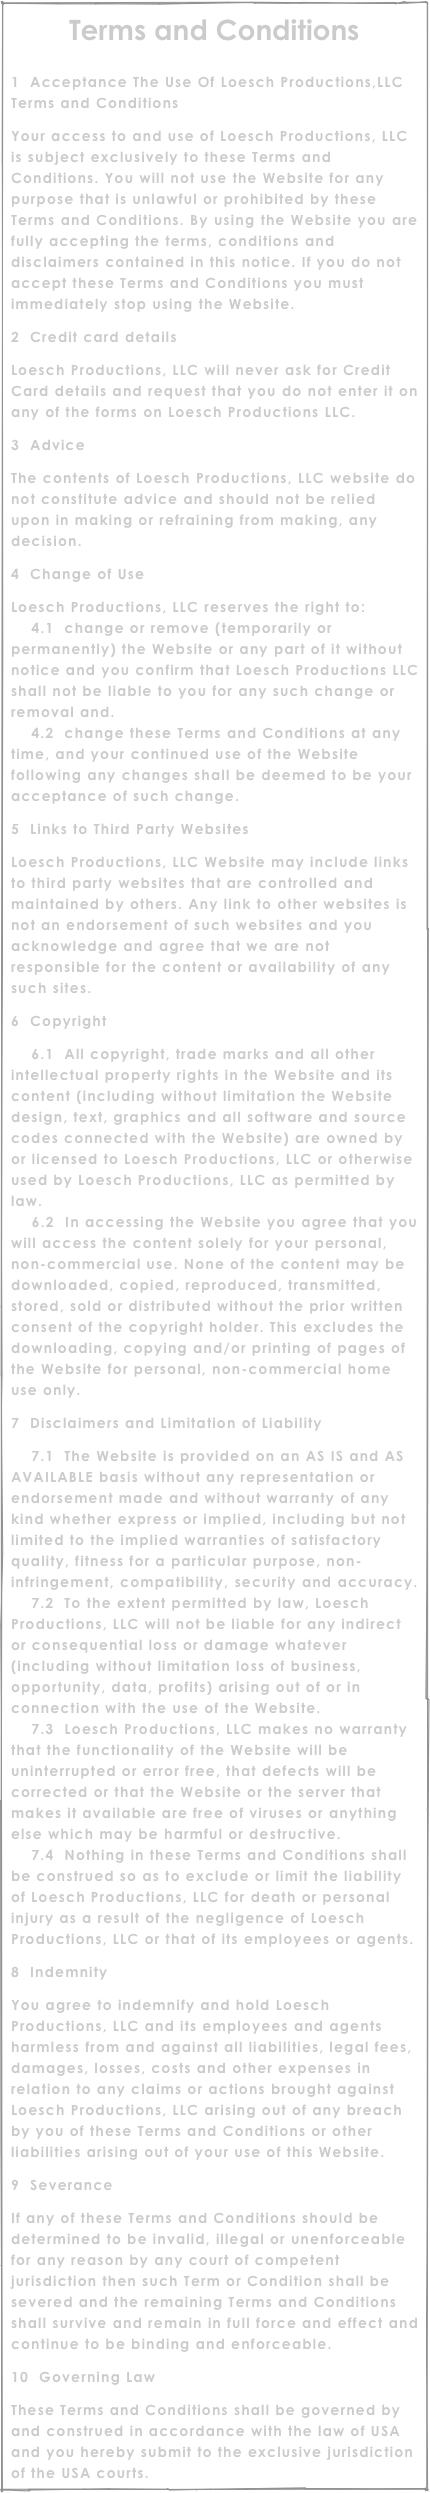 Terms and Conditions

1  Acceptance The Use Of Loesch Productions,LLC Terms and Conditions
Your access to and use of Loesch Productions, LLC is subject exclusively to these Terms and Conditions. You will not use the Website for any purpose that is unlawful or prohibited by these Terms and Conditions. By using the Website you are fully accepting the terms, conditions and disclaimers contained in this notice. If you do not accept these Terms and Conditions you must immediately stop using the Website.
2  Credit card details
Loesch Productions, LLC will never ask for Credit Card details and request that you do not enter it on any of the forms on Loesch Productions LLC.
3  Advice
The contents of Loesch Productions, LLC website do not constitute advice and should not be relied upon in making or refraining from making, any decision.
4  Change of Use
Loesch Productions, LLC reserves the right to:     4.1  change or remove (temporarily or permanently) the Website or any part of it without notice and you confirm that Loesch Productions LLC shall not be liable to you for any such change or removal and.     4.2  change these Terms and Conditions at any time, and your continued use of the Website following any changes shall be deemed to be your acceptance of such change.
5  Links to Third Party Websites
Loesch Productions, LLC Website may include links to third party websites that are controlled and maintained by others. Any link to other websites is not an endorsement of such websites and you acknowledge and agree that we are not responsible for the content or availability of any such sites.
6  Copyright
    6.1  All copyright, trade marks and all other intellectual property rights in the Website and its content (including without limitation the Website design, text, graphics and all software and source codes connected with the Website) are owned by or licensed to Loesch Productions, LLC or otherwise used by Loesch Productions, LLC as permitted by law.     6.2  In accessing the Website you agree that you will access the content solely for your personal, non-commercial use. None of the content may be downloaded, copied, reproduced, transmitted, stored, sold or distributed without the prior written consent of the copyright holder. This excludes the downloading, copying and/or printing of pages of the Website for personal, non-commercial home use only.
7  Disclaimers and Limitation of Liability
    7.1  The Website is provided on an AS IS and AS AVAILABLE basis without any representation or endorsement made and without warranty of any kind whether express or implied, including but not limited to the implied warranties of satisfactory quality, fitness for a particular purpose, non-infringement, compatibility, security and accuracy.     7.2  To the extent permitted by law, Loesch Productions, LLC will not be liable for any indirect or consequential loss or damage whatever (including without limitation loss of business, opportunity, data, profits) arising out of or in connection with the use of the Website.     7.3  Loesch Productions, LLC makes no warranty that the functionality of the Website will be uninterrupted or error free, that defects will be corrected or that the Website or the server that makes it available are free of viruses or anything else which may be harmful or destructive.     7.4  Nothing in these Terms and Conditions shall be construed so as to exclude or limit the liability of Loesch Productions, LLC for death or personal injury as a result of the negligence of Loesch Productions, LLC or that of its employees or agents.
8  Indemnity
You agree to indemnify and hold Loesch Productions, LLC and its employees and agents harmless from and against all liabilities, legal fees, damages, losses, costs and other expenses in relation to any claims or actions brought against Loesch Productions, LLC arising out of any breach by you of these Terms and Conditions or other liabilities arising out of your use of this Website.
9  Severance
If any of these Terms and Conditions should be determined to be invalid, illegal or unenforceable for any reason by any court of competent jurisdiction then such Term or Condition shall be severed and the remaining Terms and Conditions shall survive and remain in full force and effect and continue to be binding and enforceable.
10  Governing Law
These Terms and Conditions shall be governed by and construed in accordance with the law of USA and you hereby submit to the exclusive jurisdiction of the USA courts.